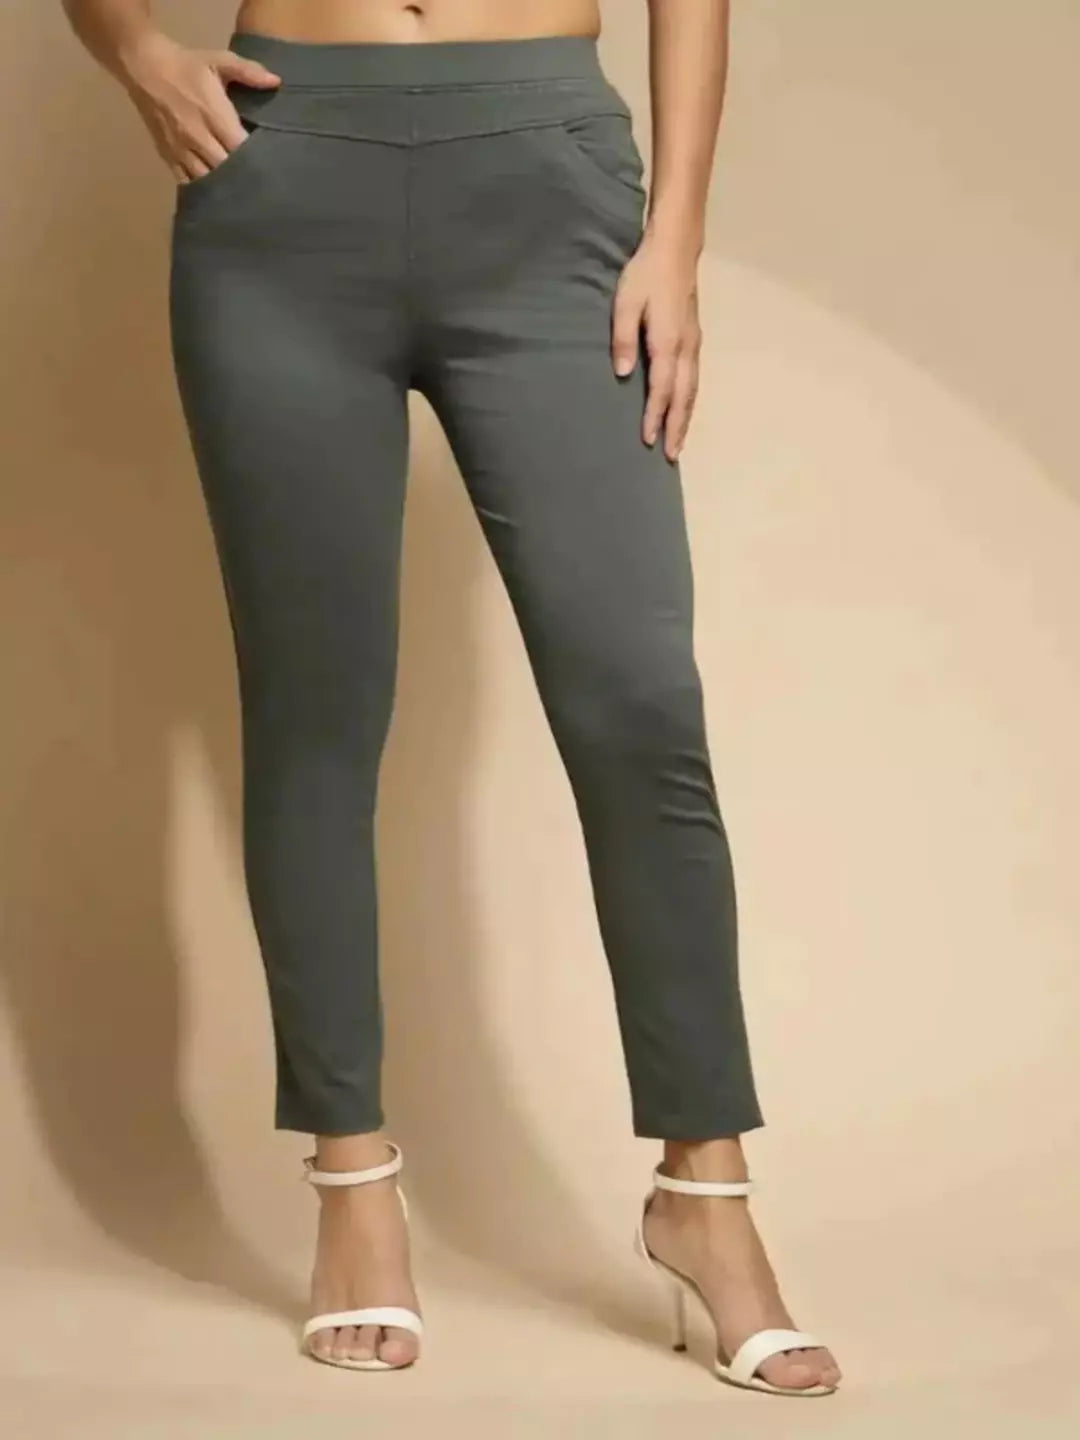 Women Olive Green Mid-Rise Full Length Stretchable Jegging